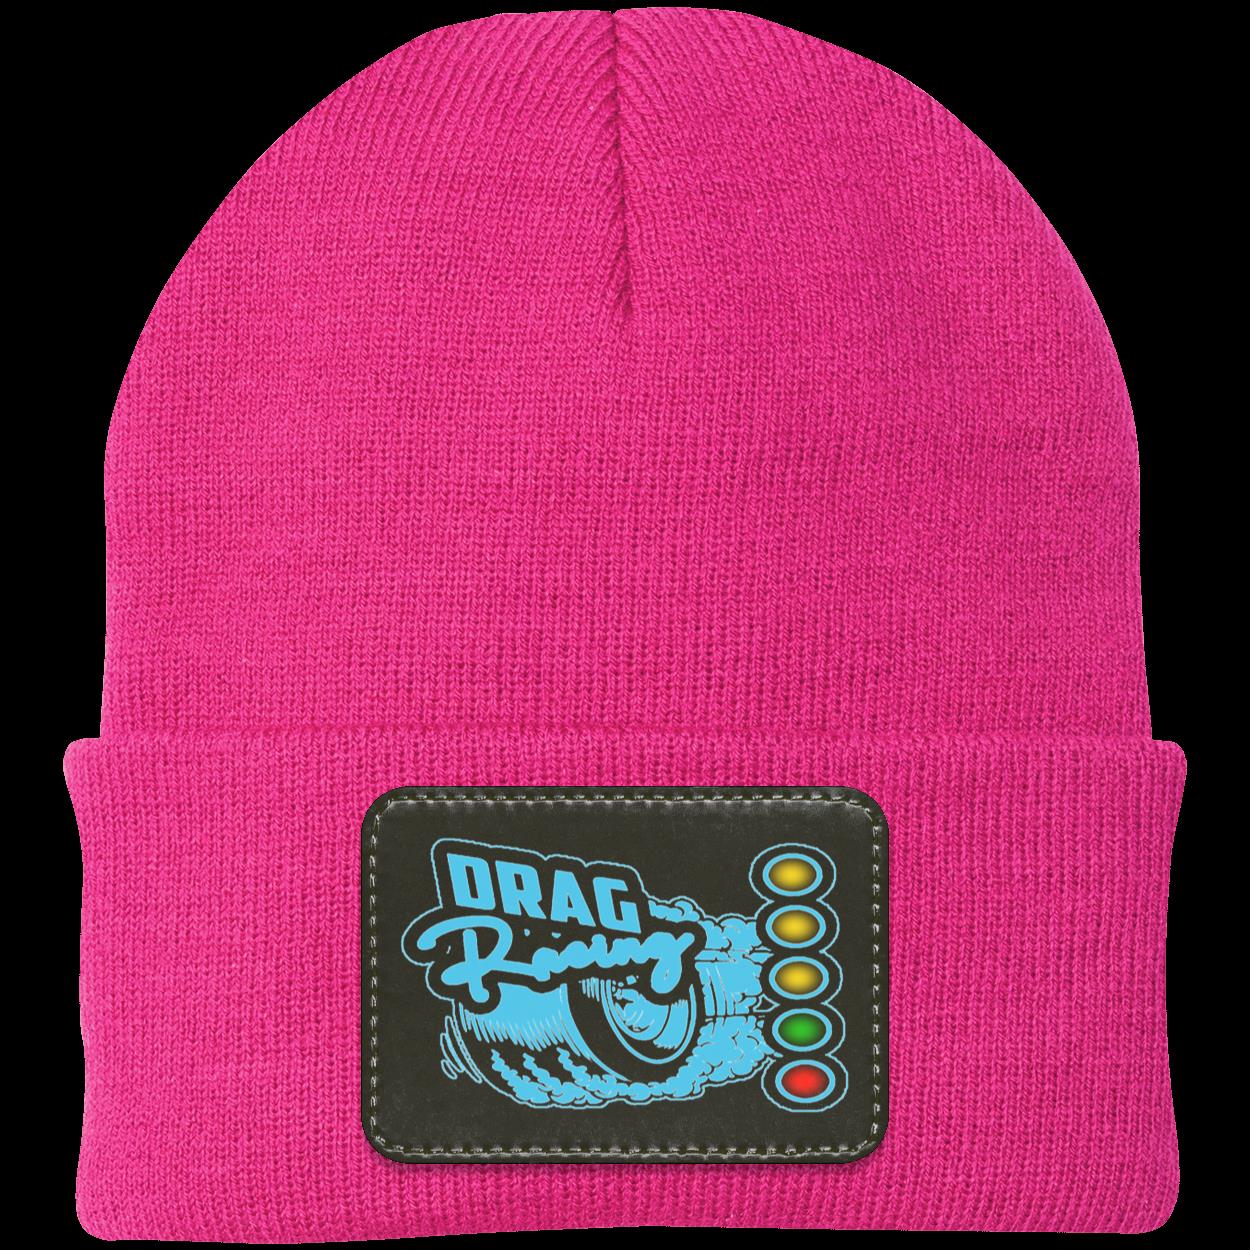 Drag Racing Patched Knit Cap V2